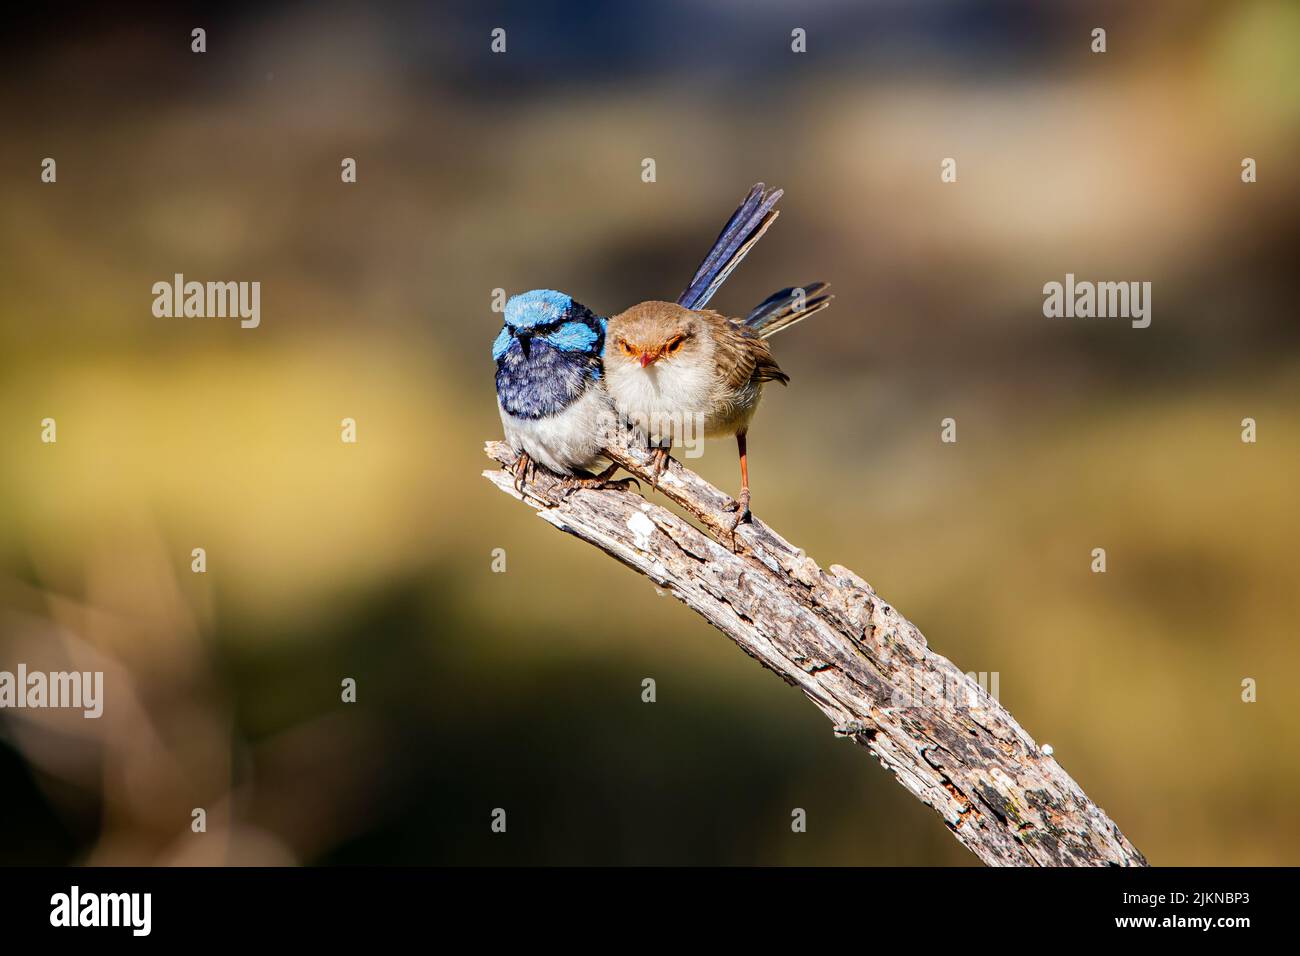 A cute superb fairy wrens couple cuddling on a wood with blurred background Stock Photo